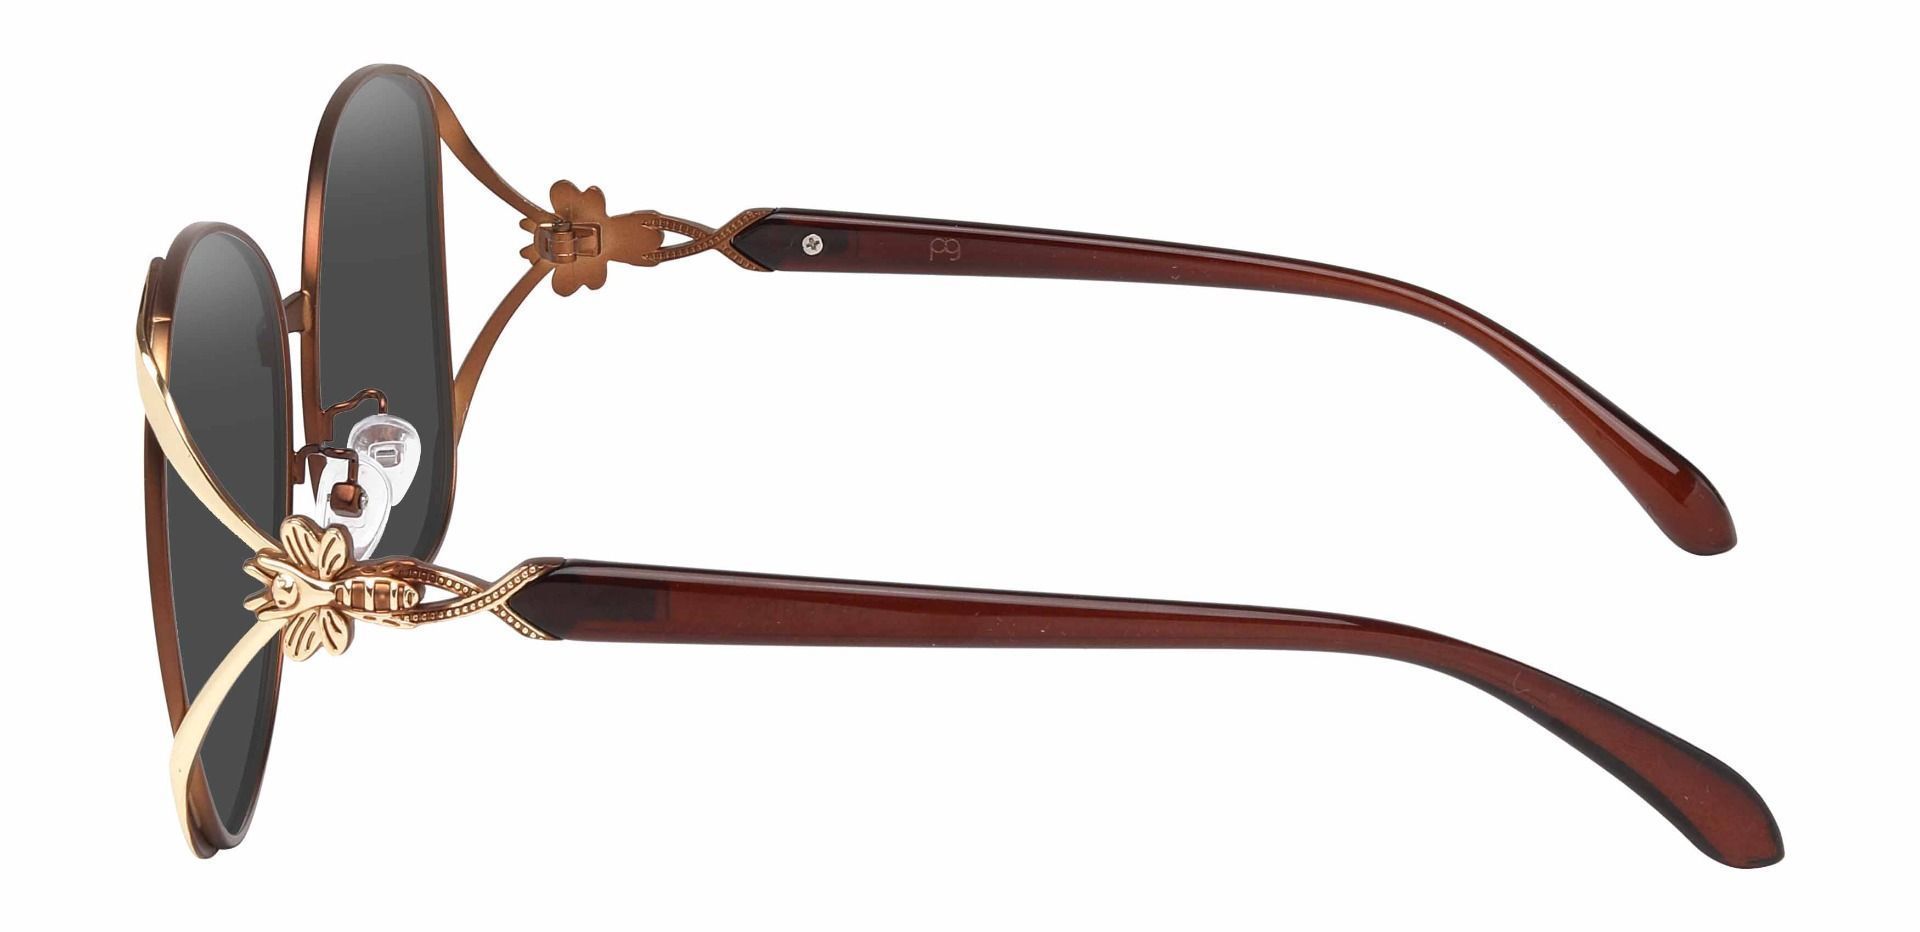 Nina Round Reading Sunglasses - Brown Frame With Gray Lenses